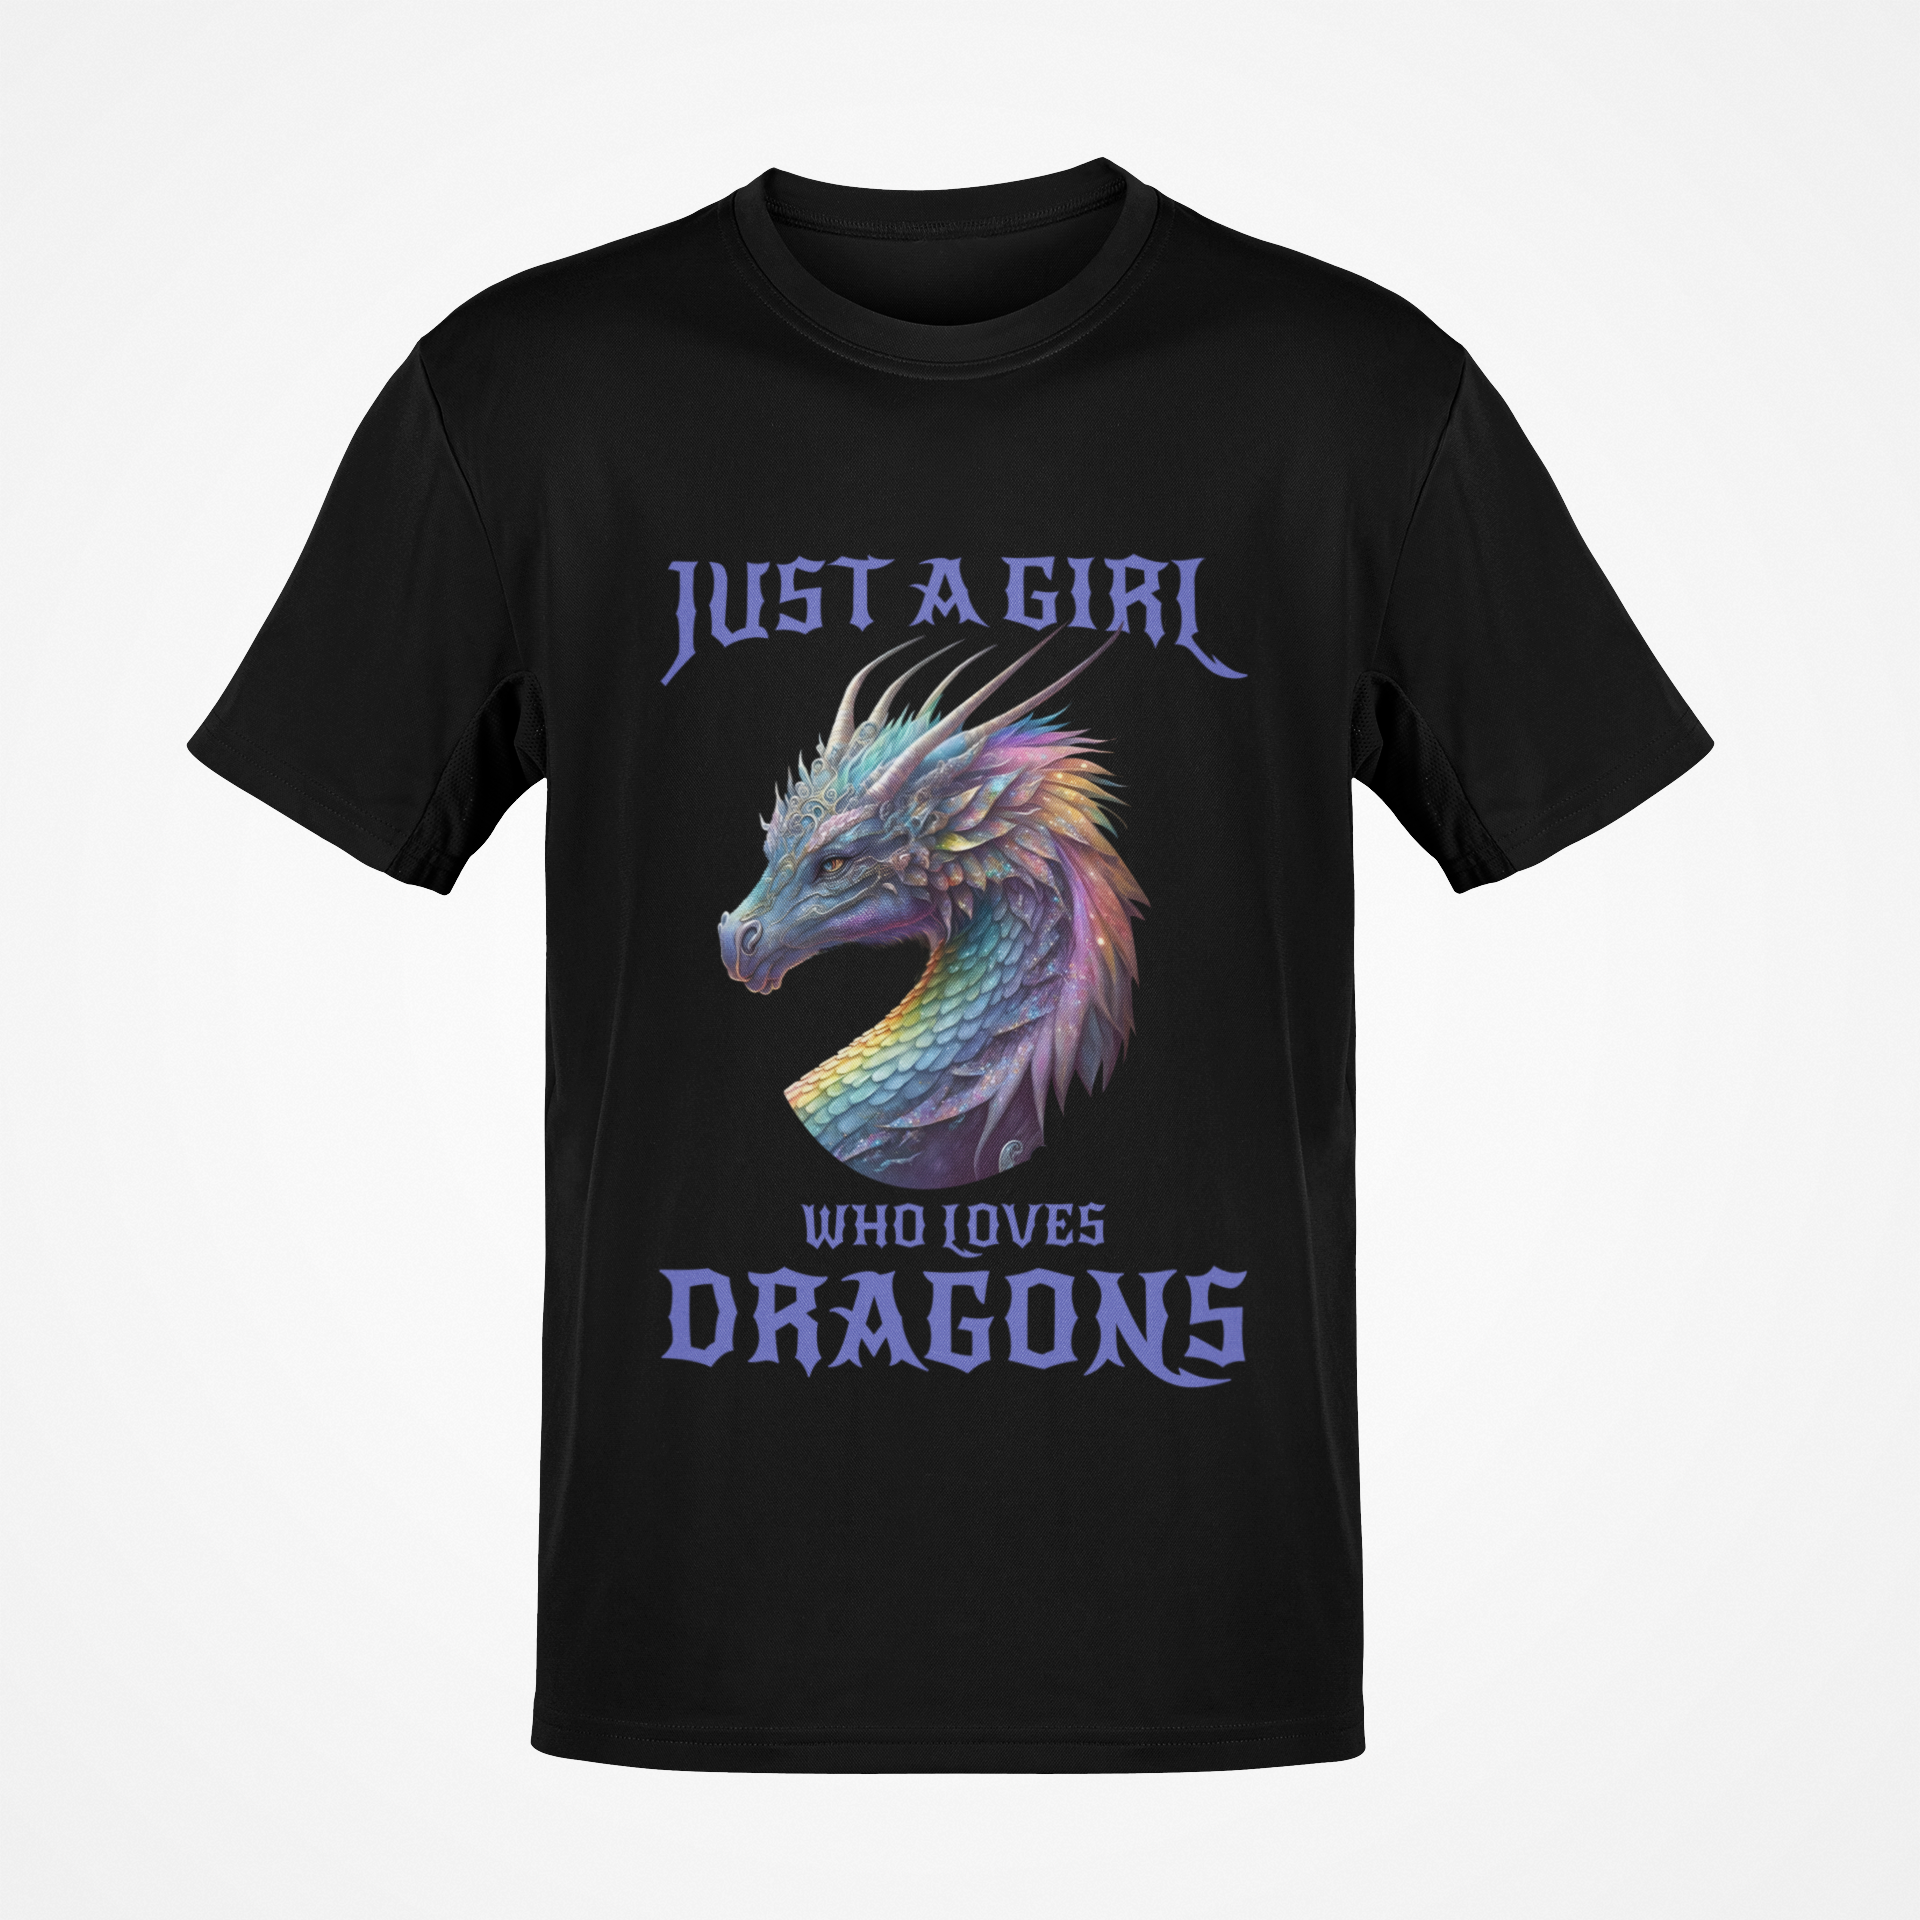 Just A Girl Who Loves Dragons T-shirt